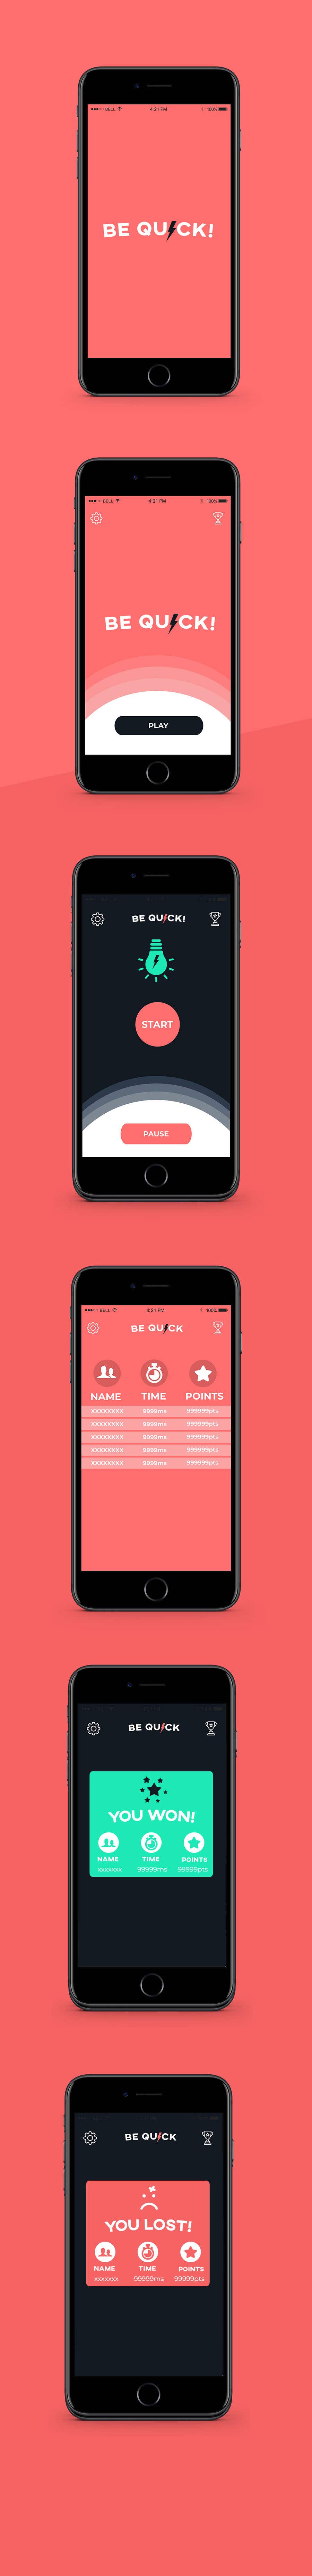 Entri Kontes #9 untuk                                                Design of a Reaction Timer App for IOS and Android Devices
                                            